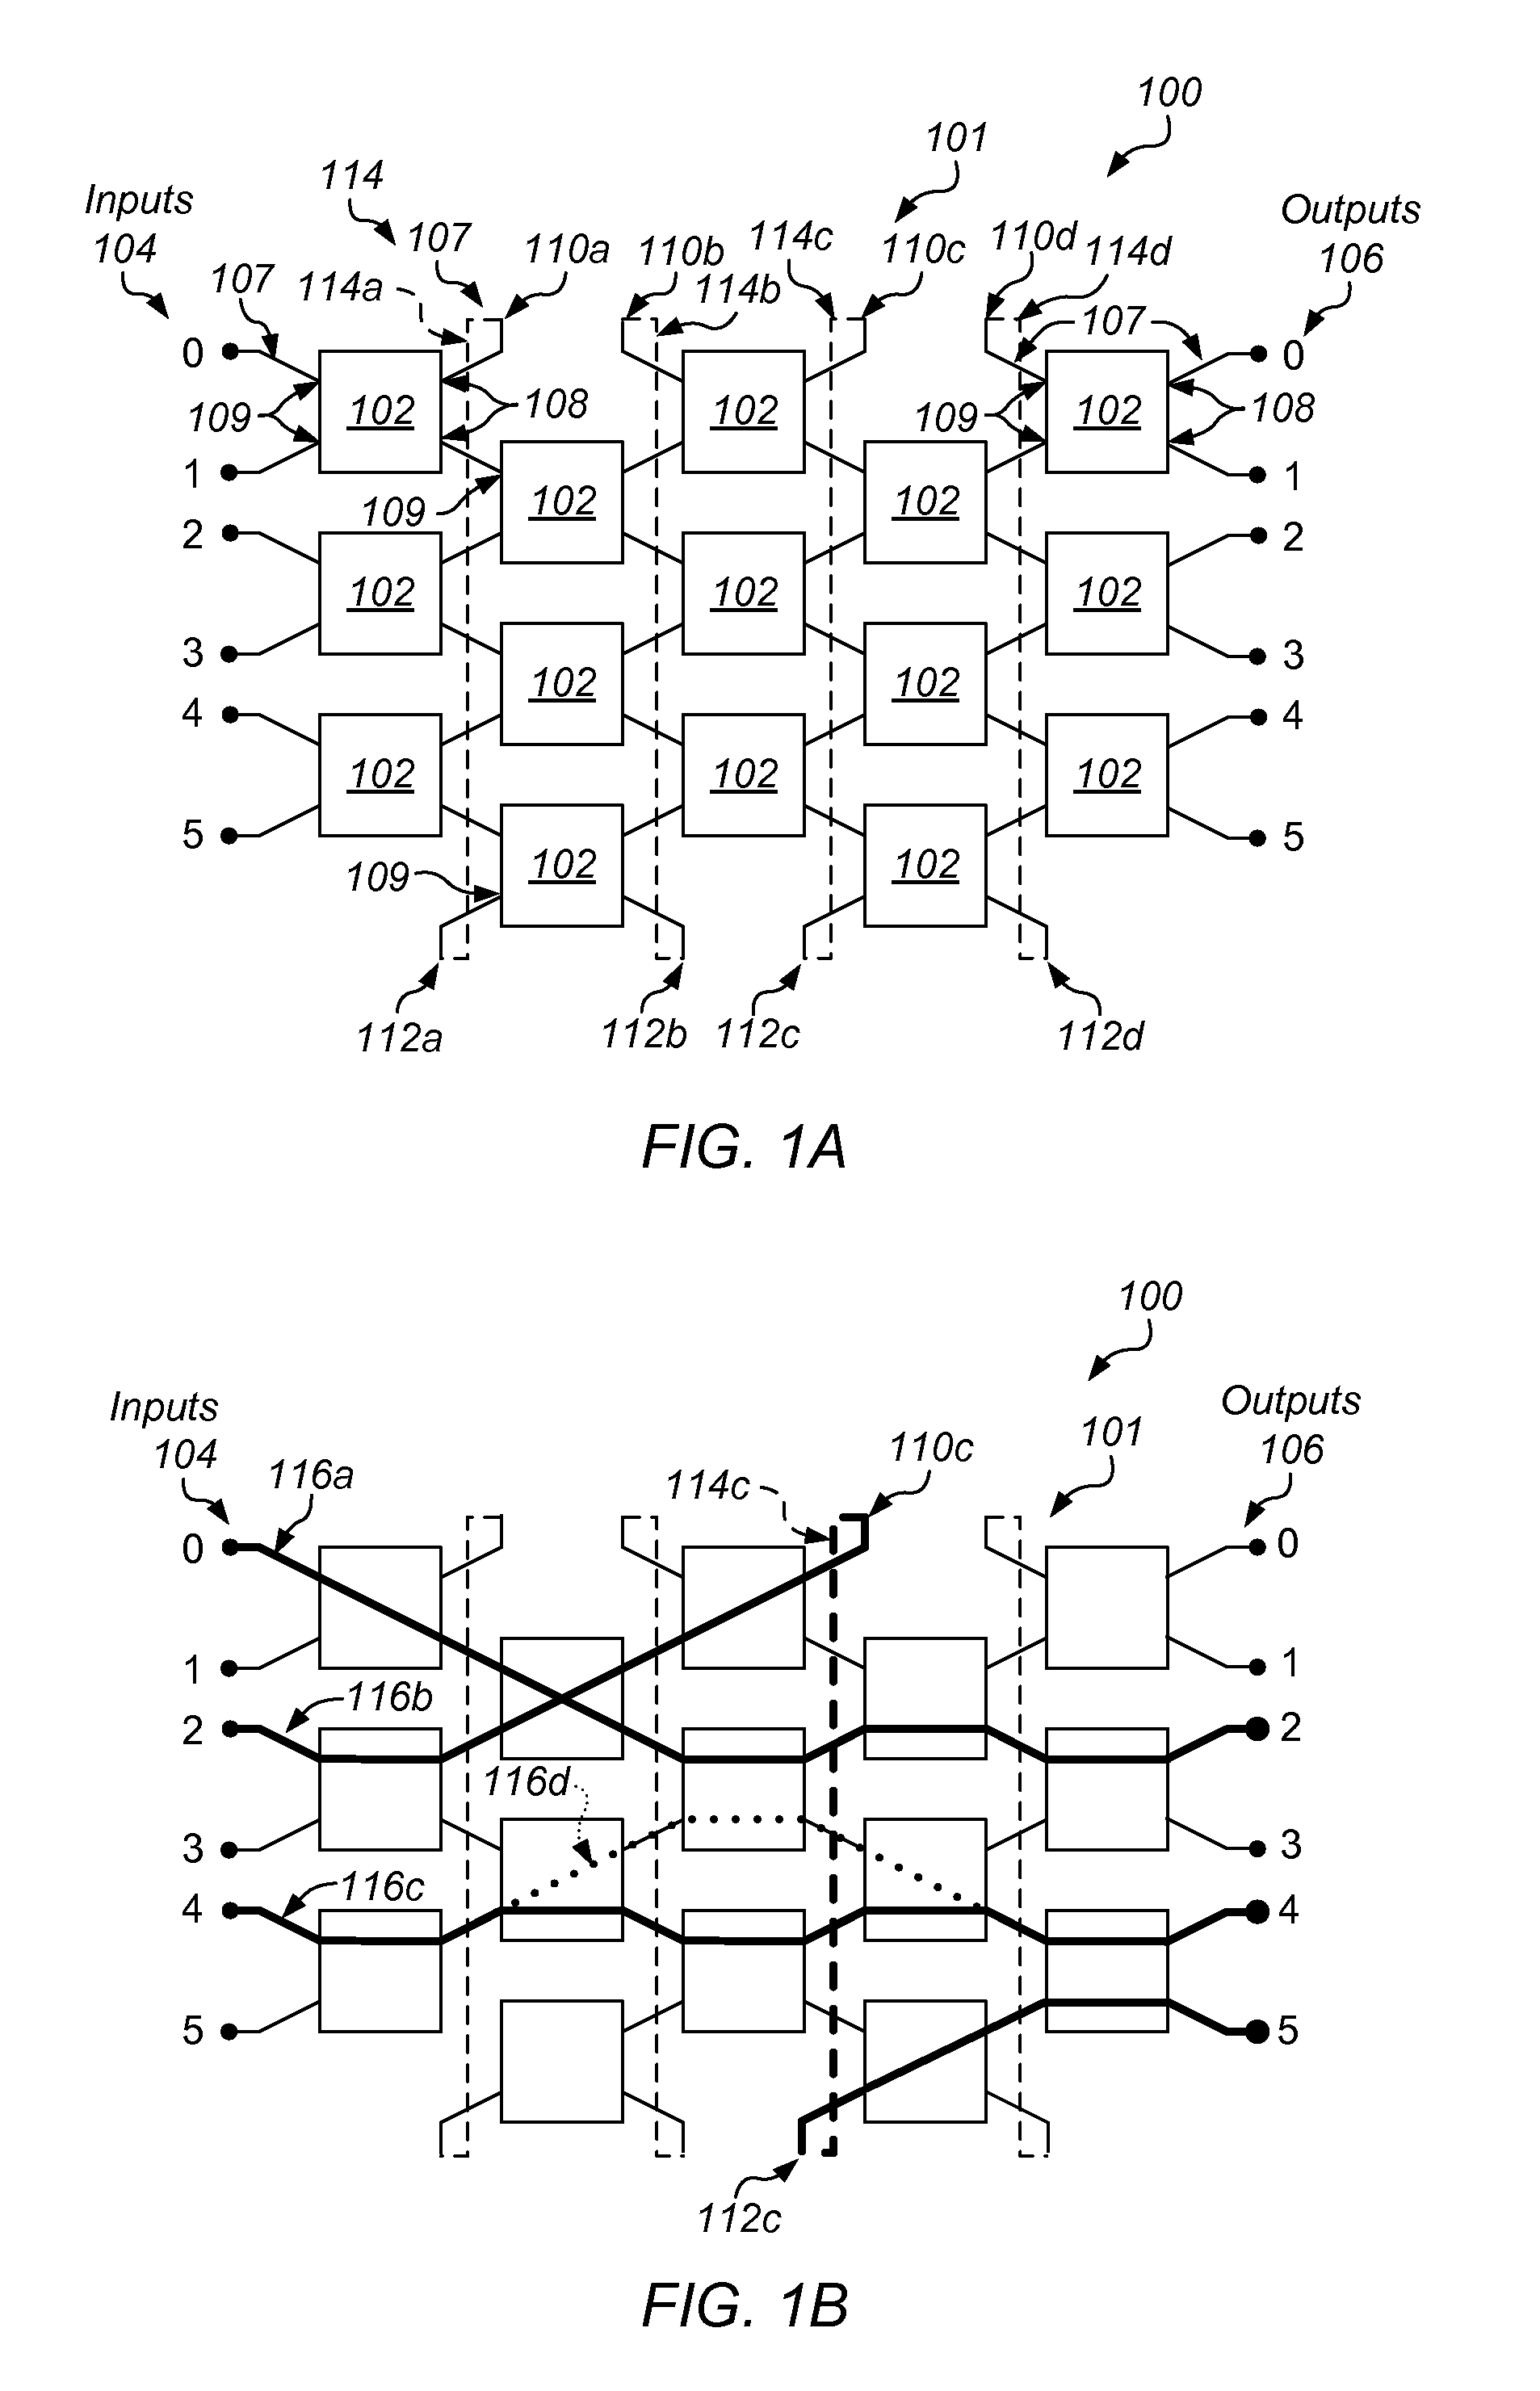 Switch matrix modeling system and method